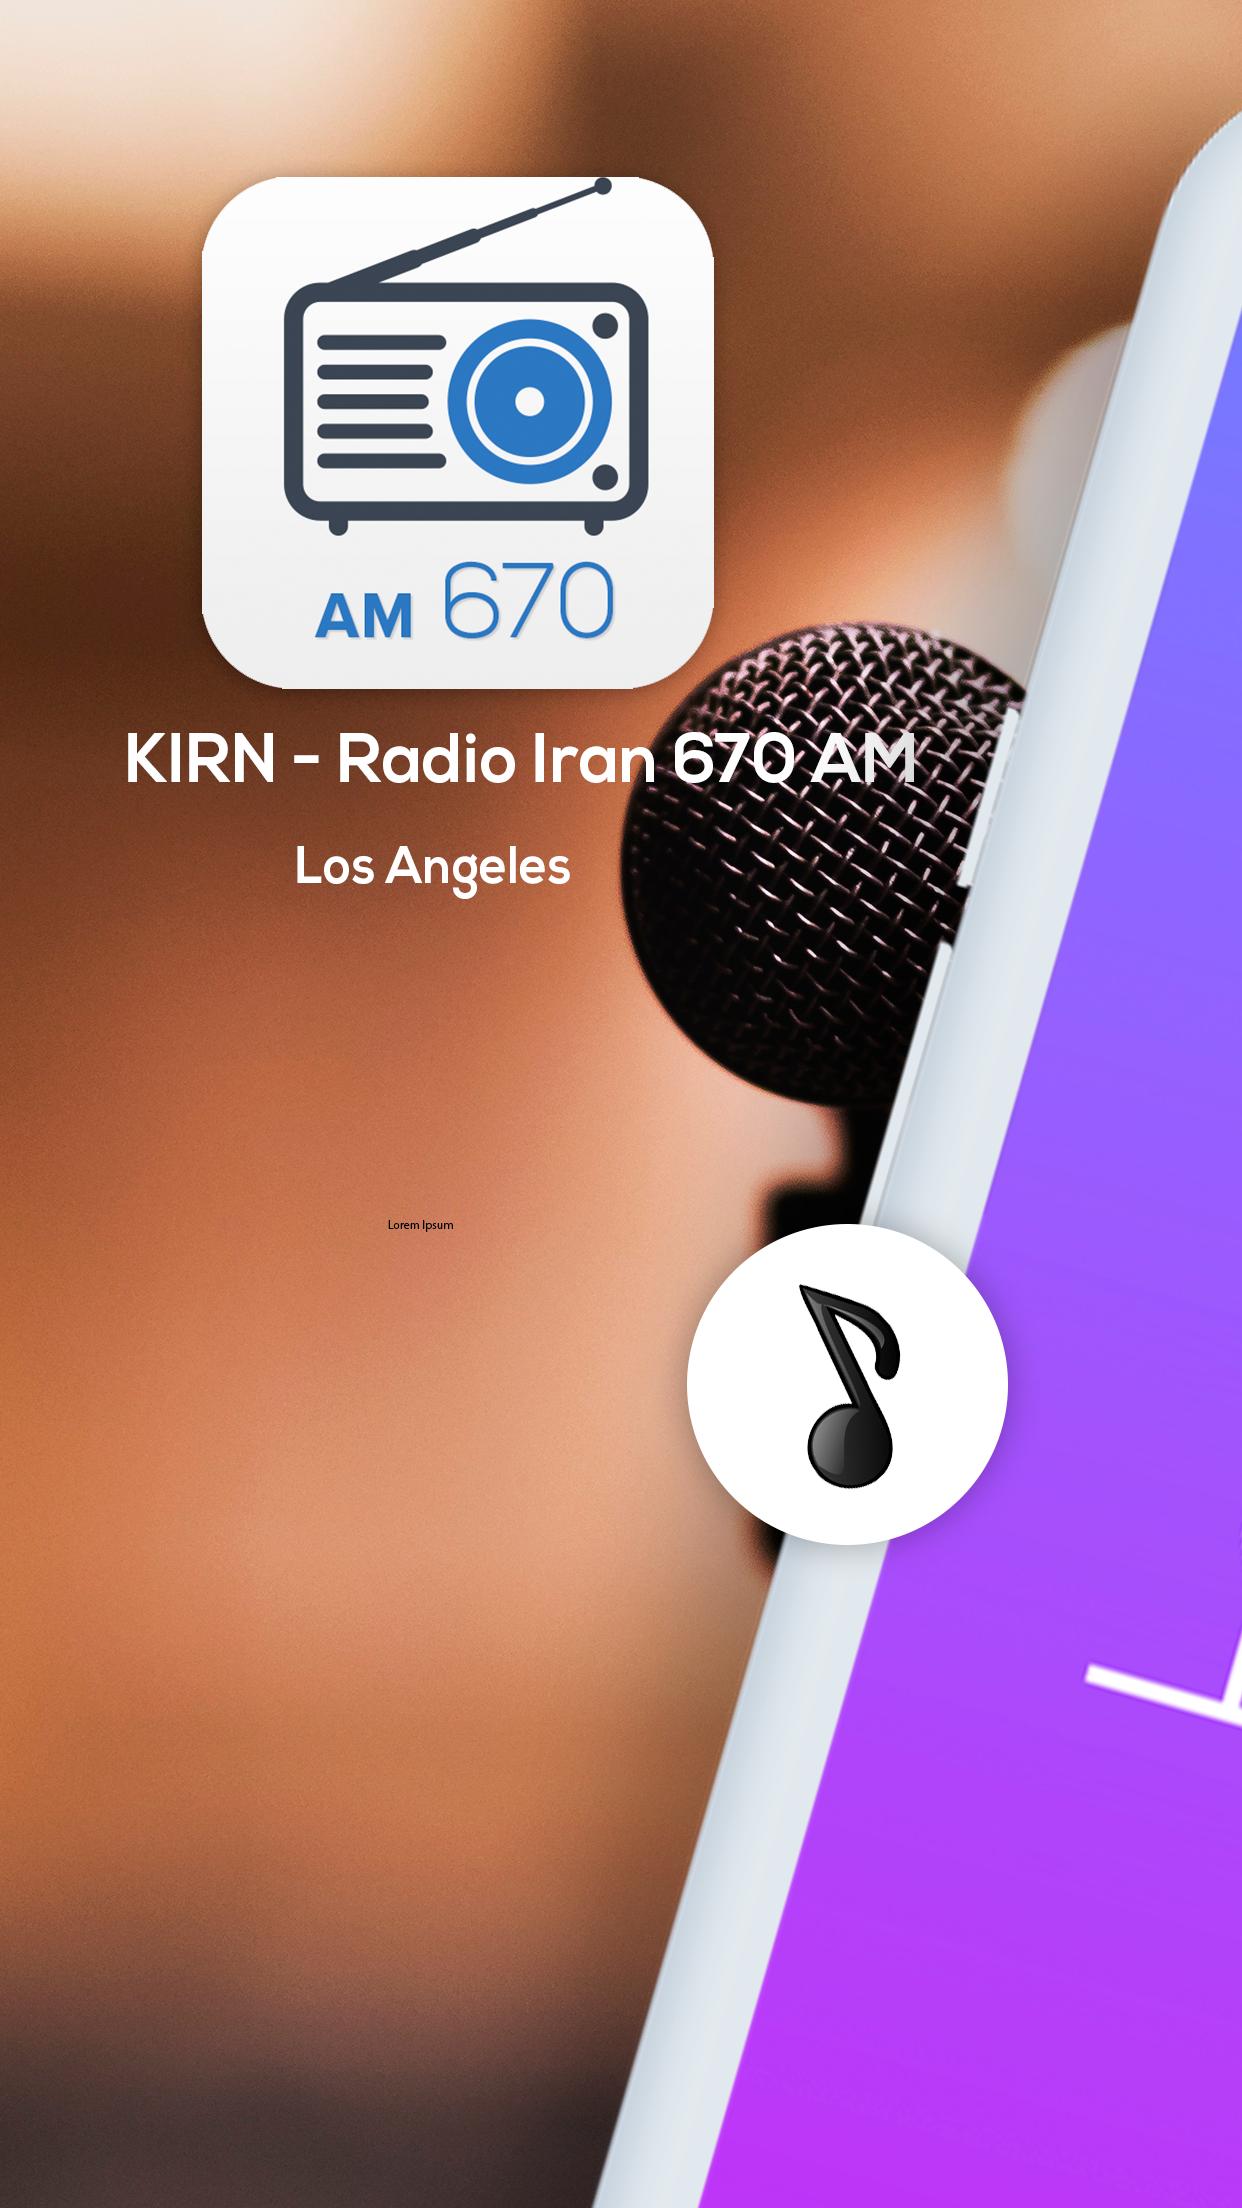 KIRN - Radio Iran 670 AM Los Angeles for Android - APK Download